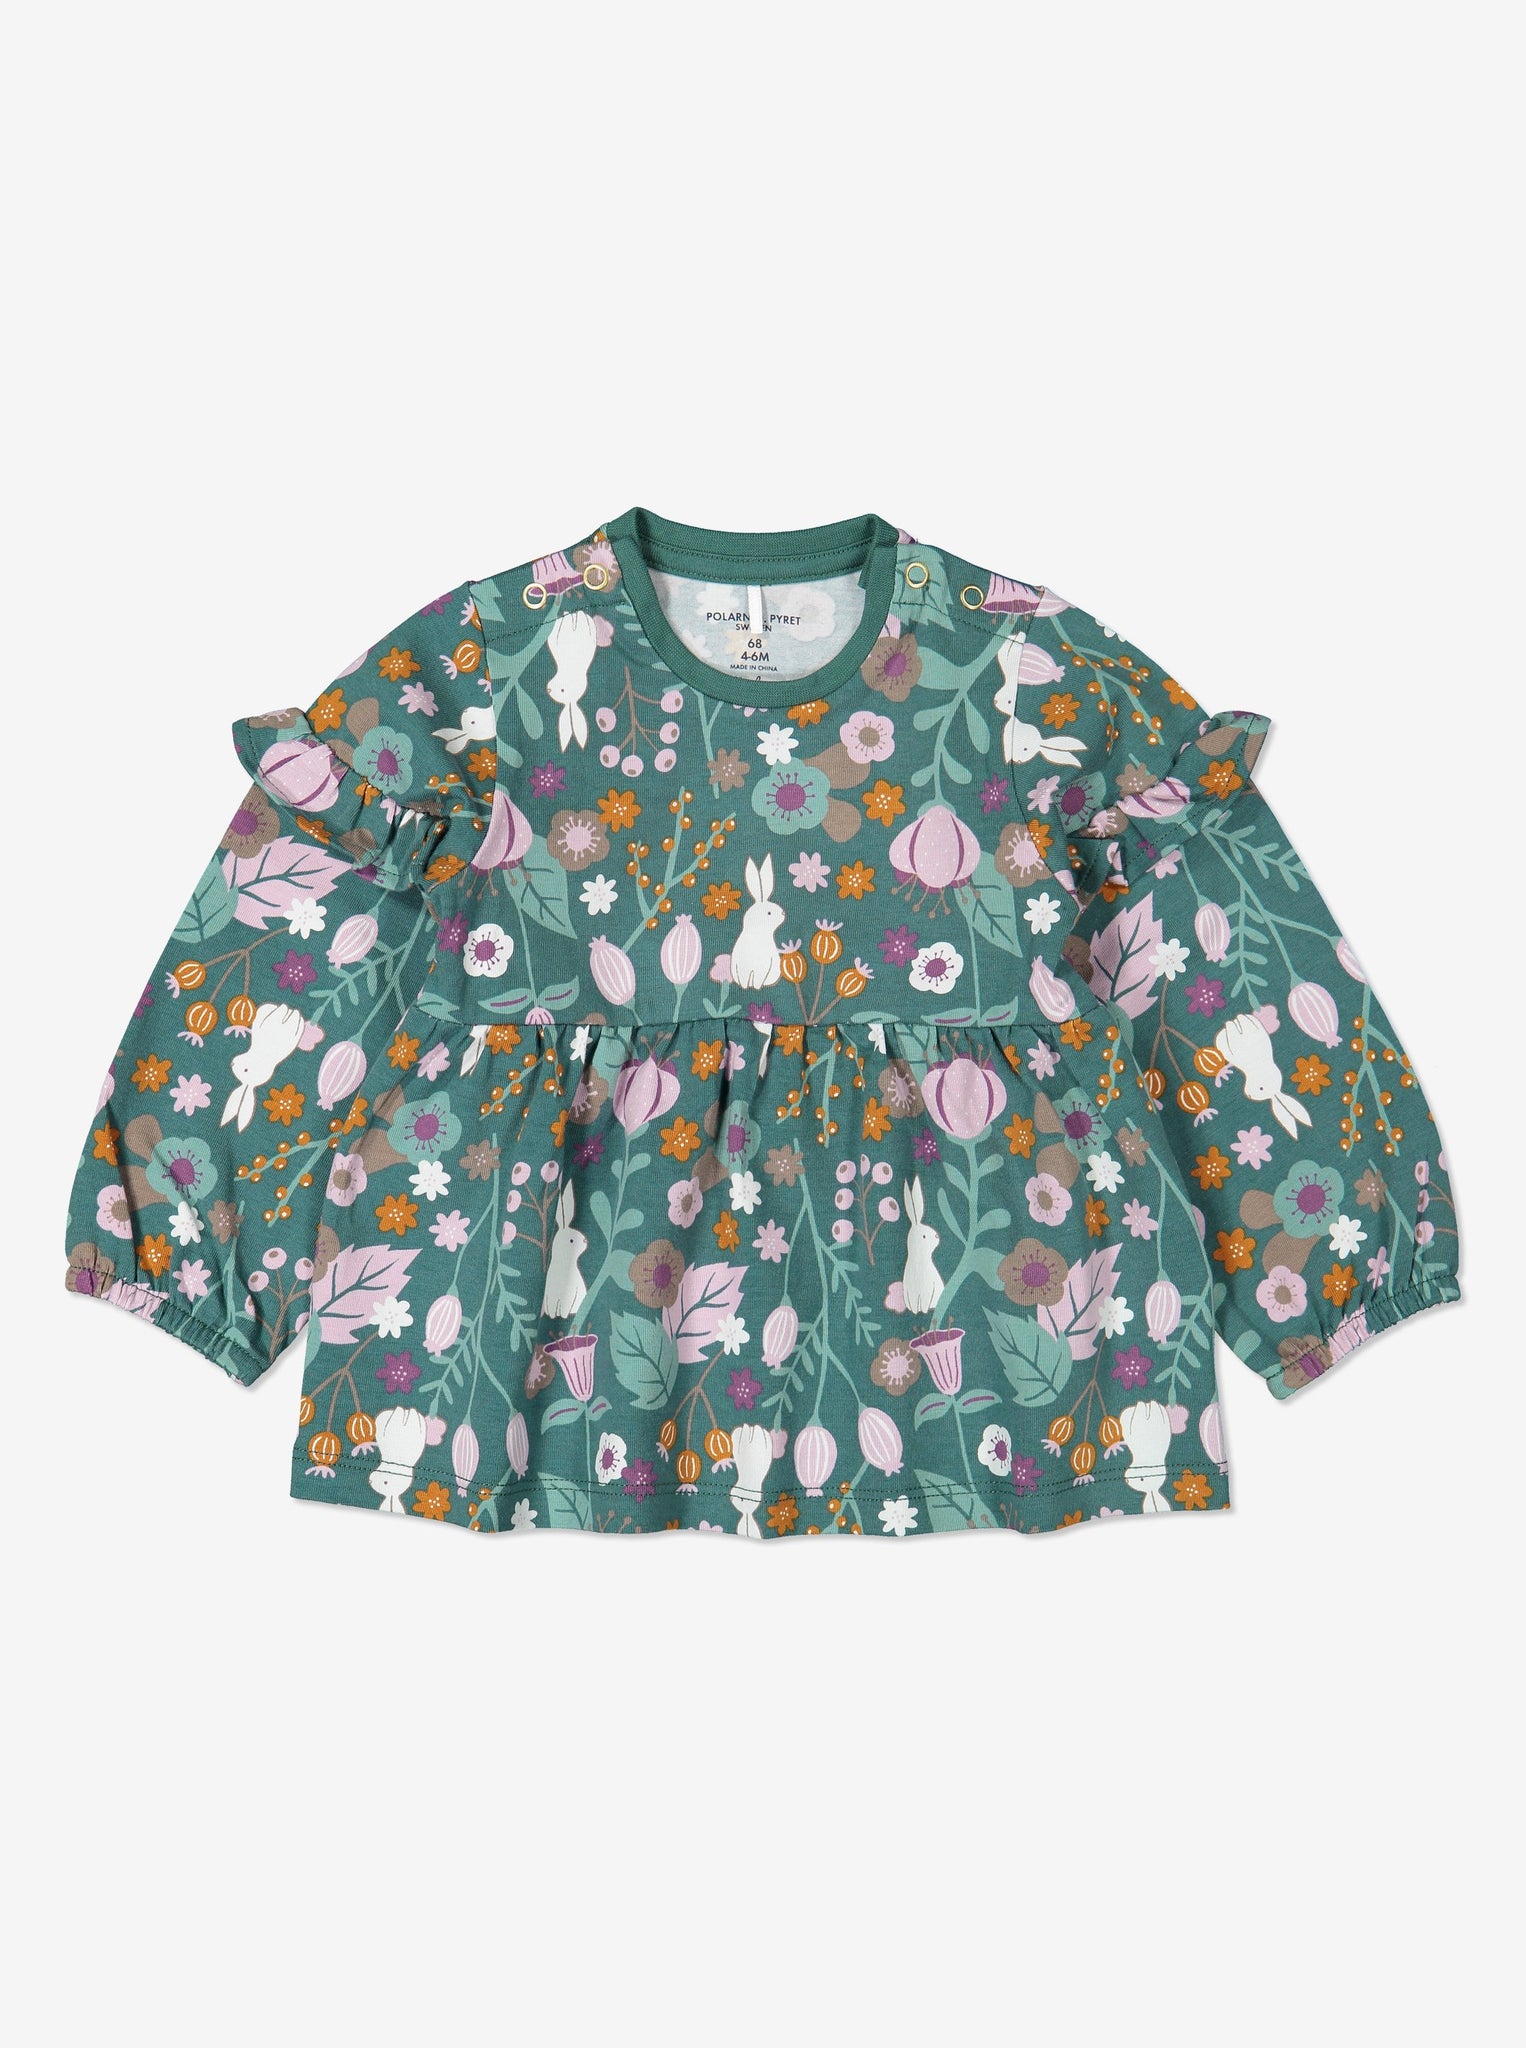 Woodland print top for baby girls with frilled shoulders, made from organic cotton fabric